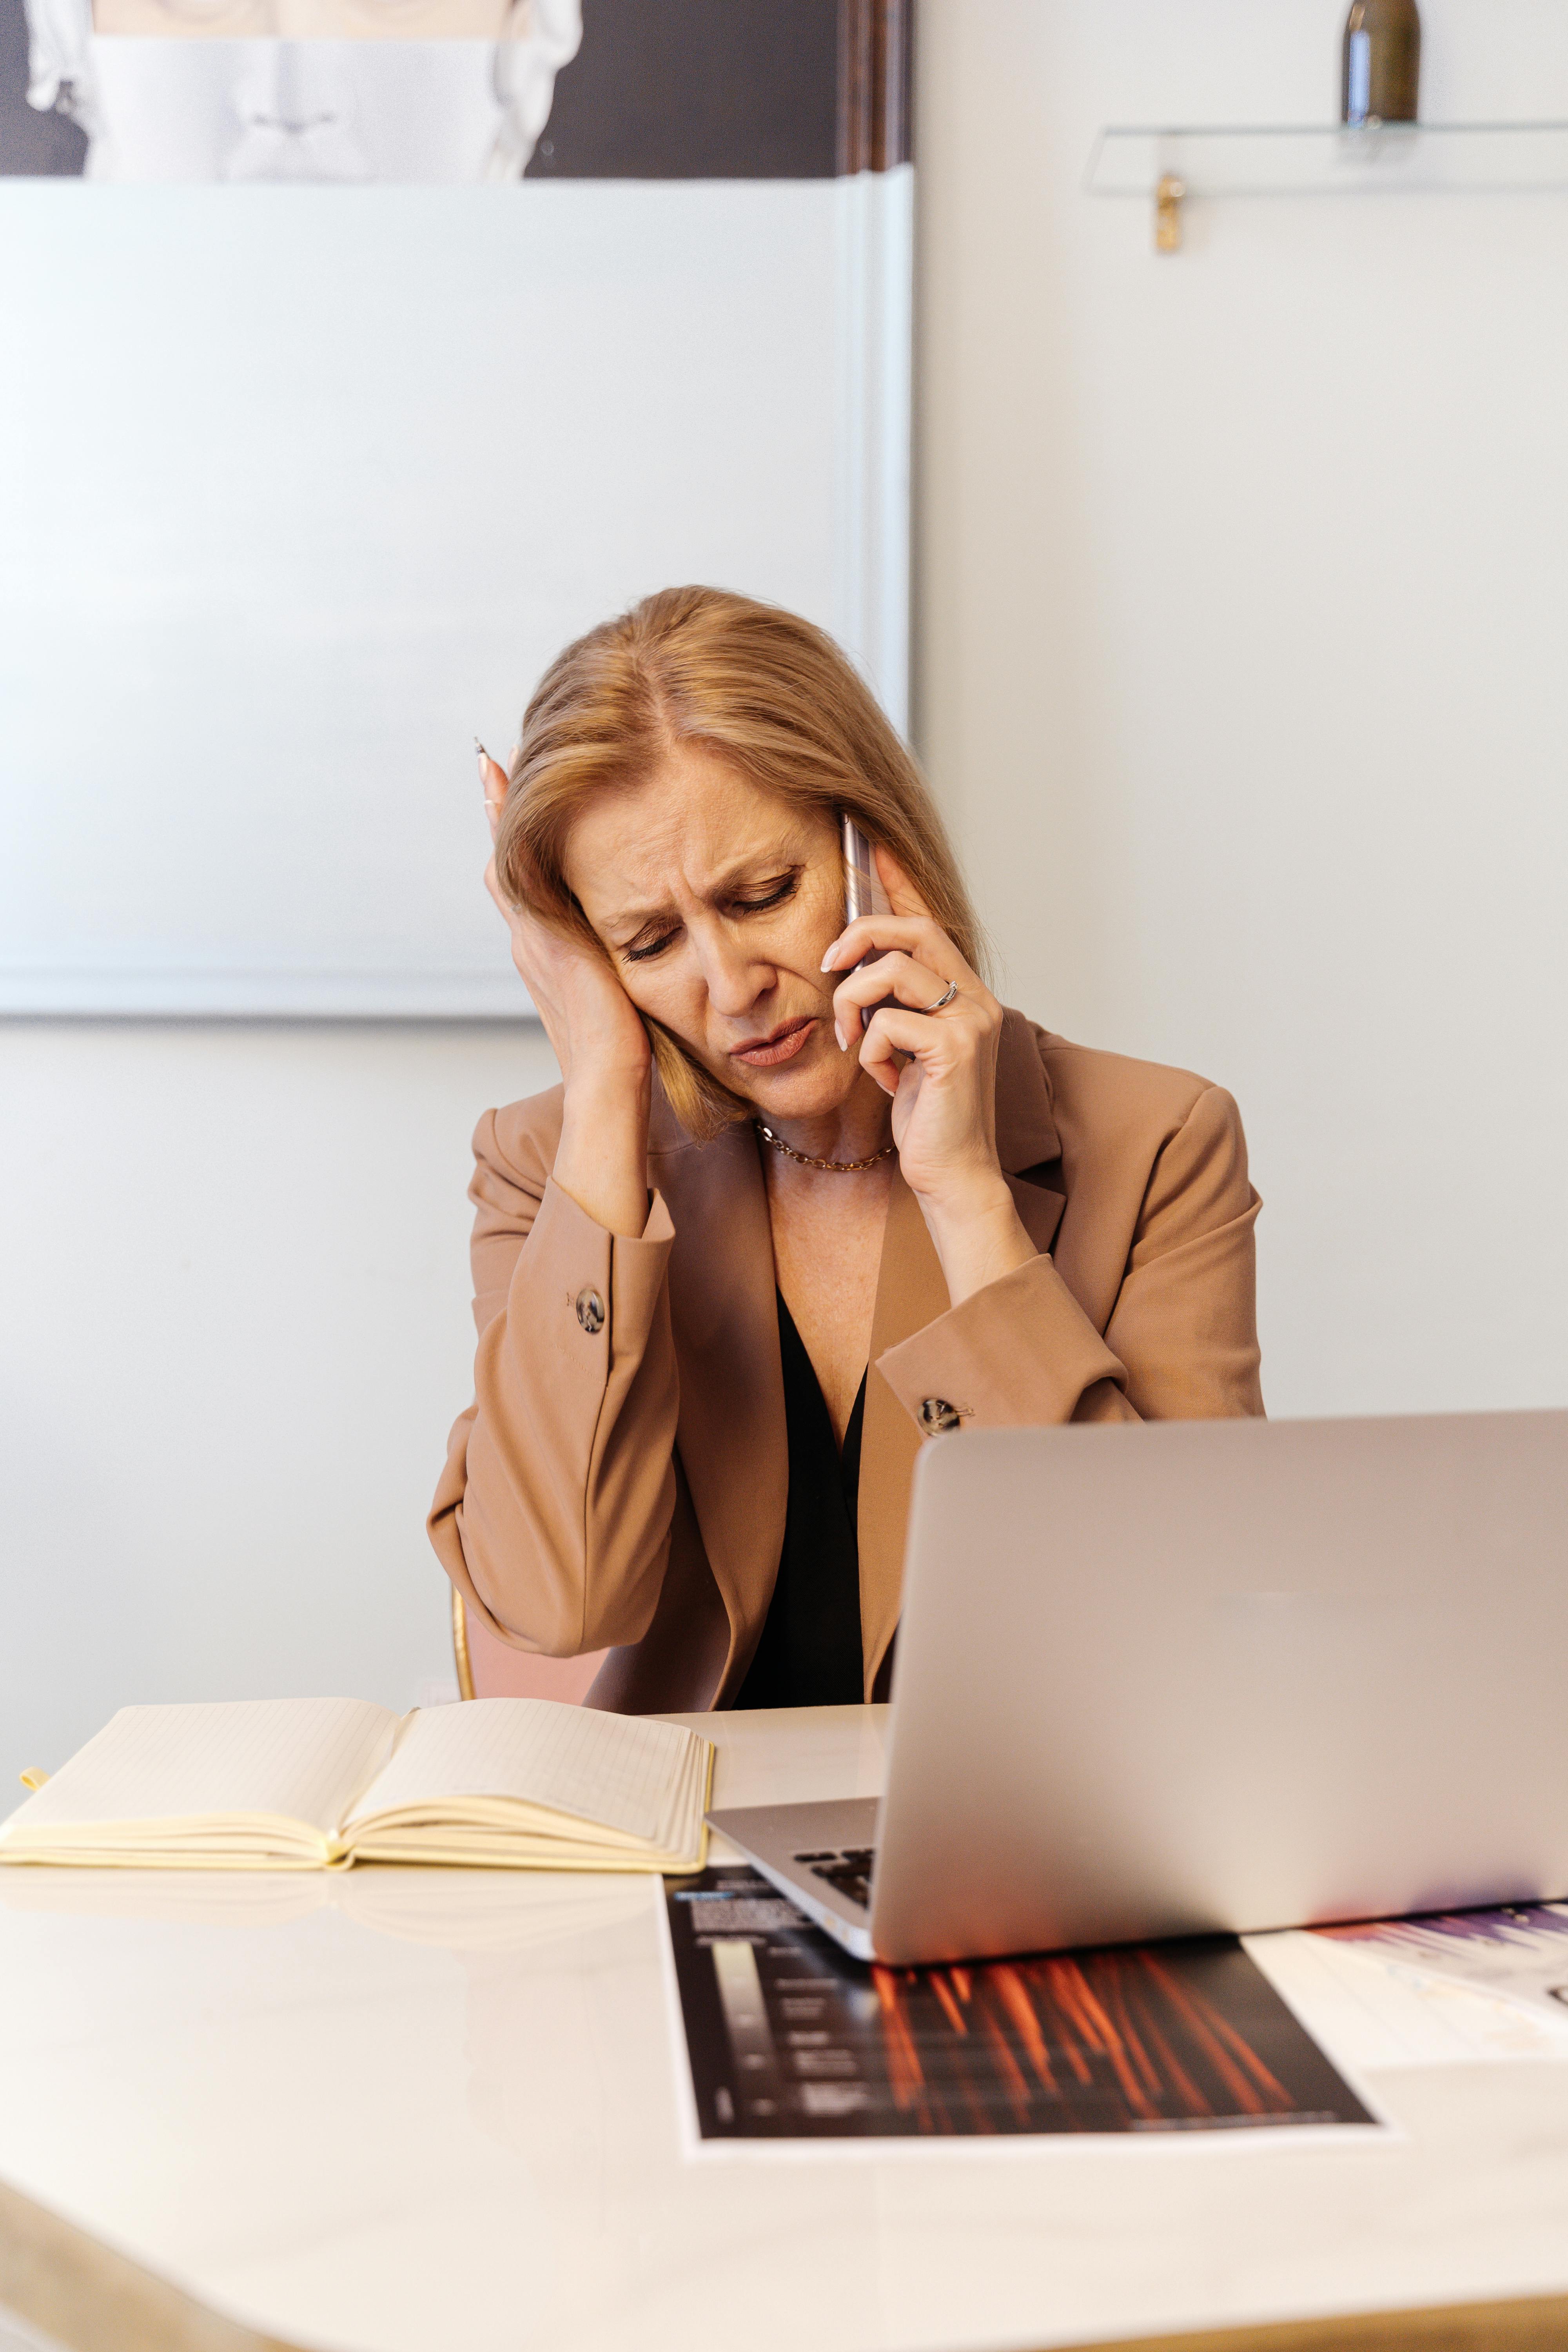 A frustrated woman on a call | Source: Pexels